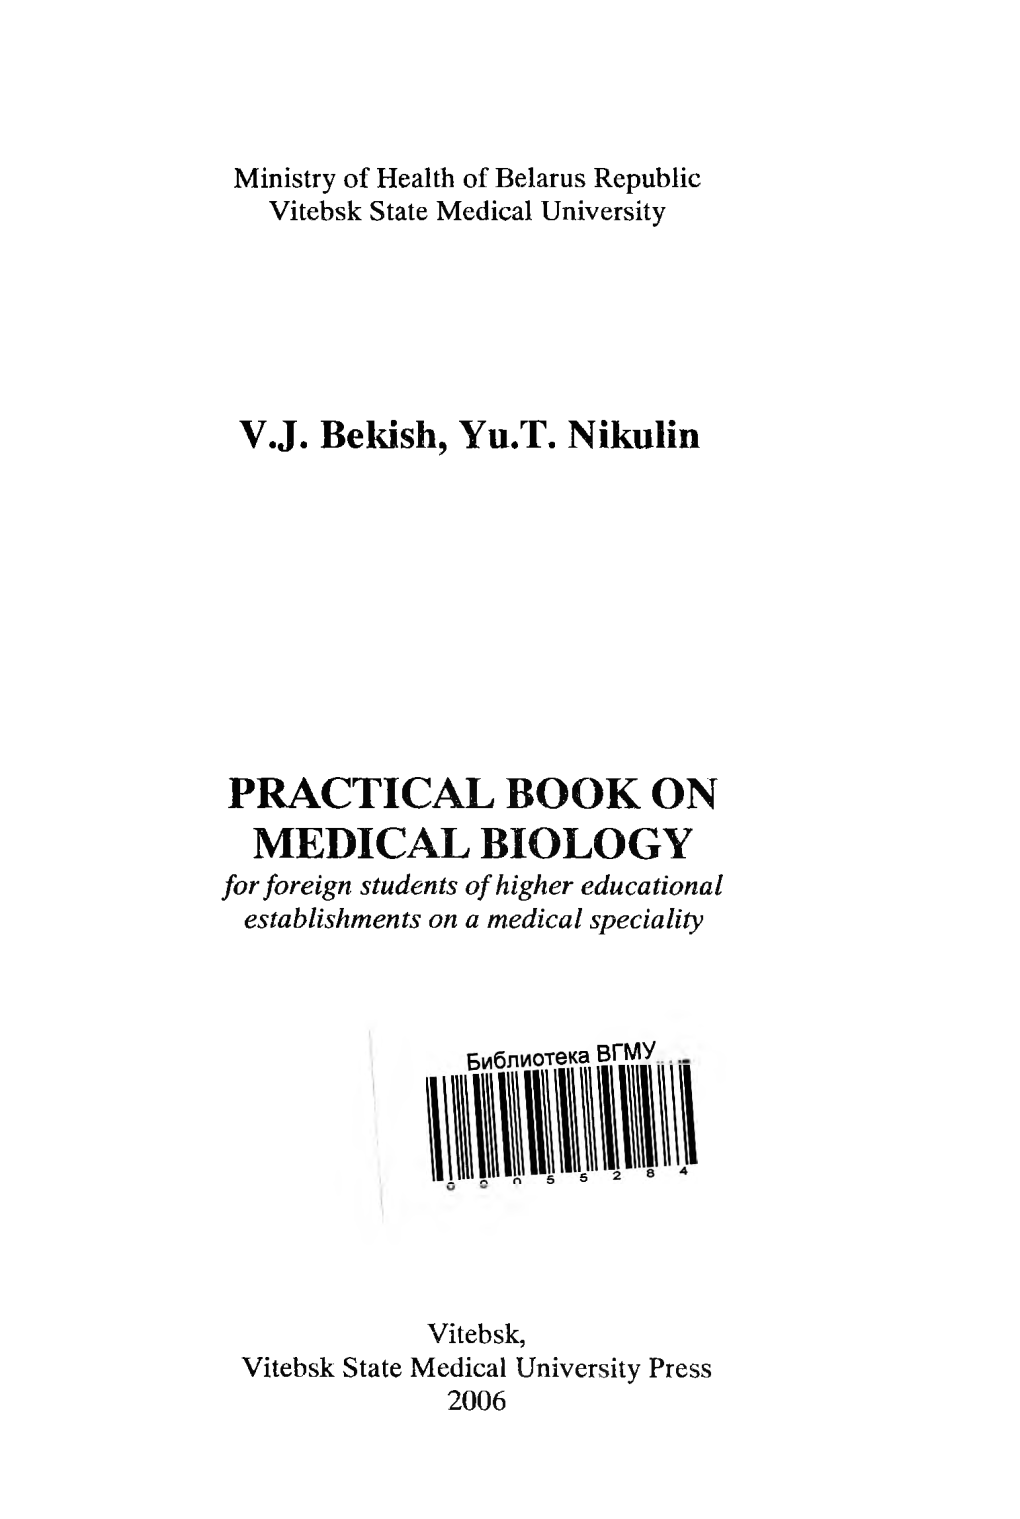 PRACTICAL BOOK on MEDICAL BIOLOGY for Foreign Students of Higher Educational Establishments on a Medical Speciality